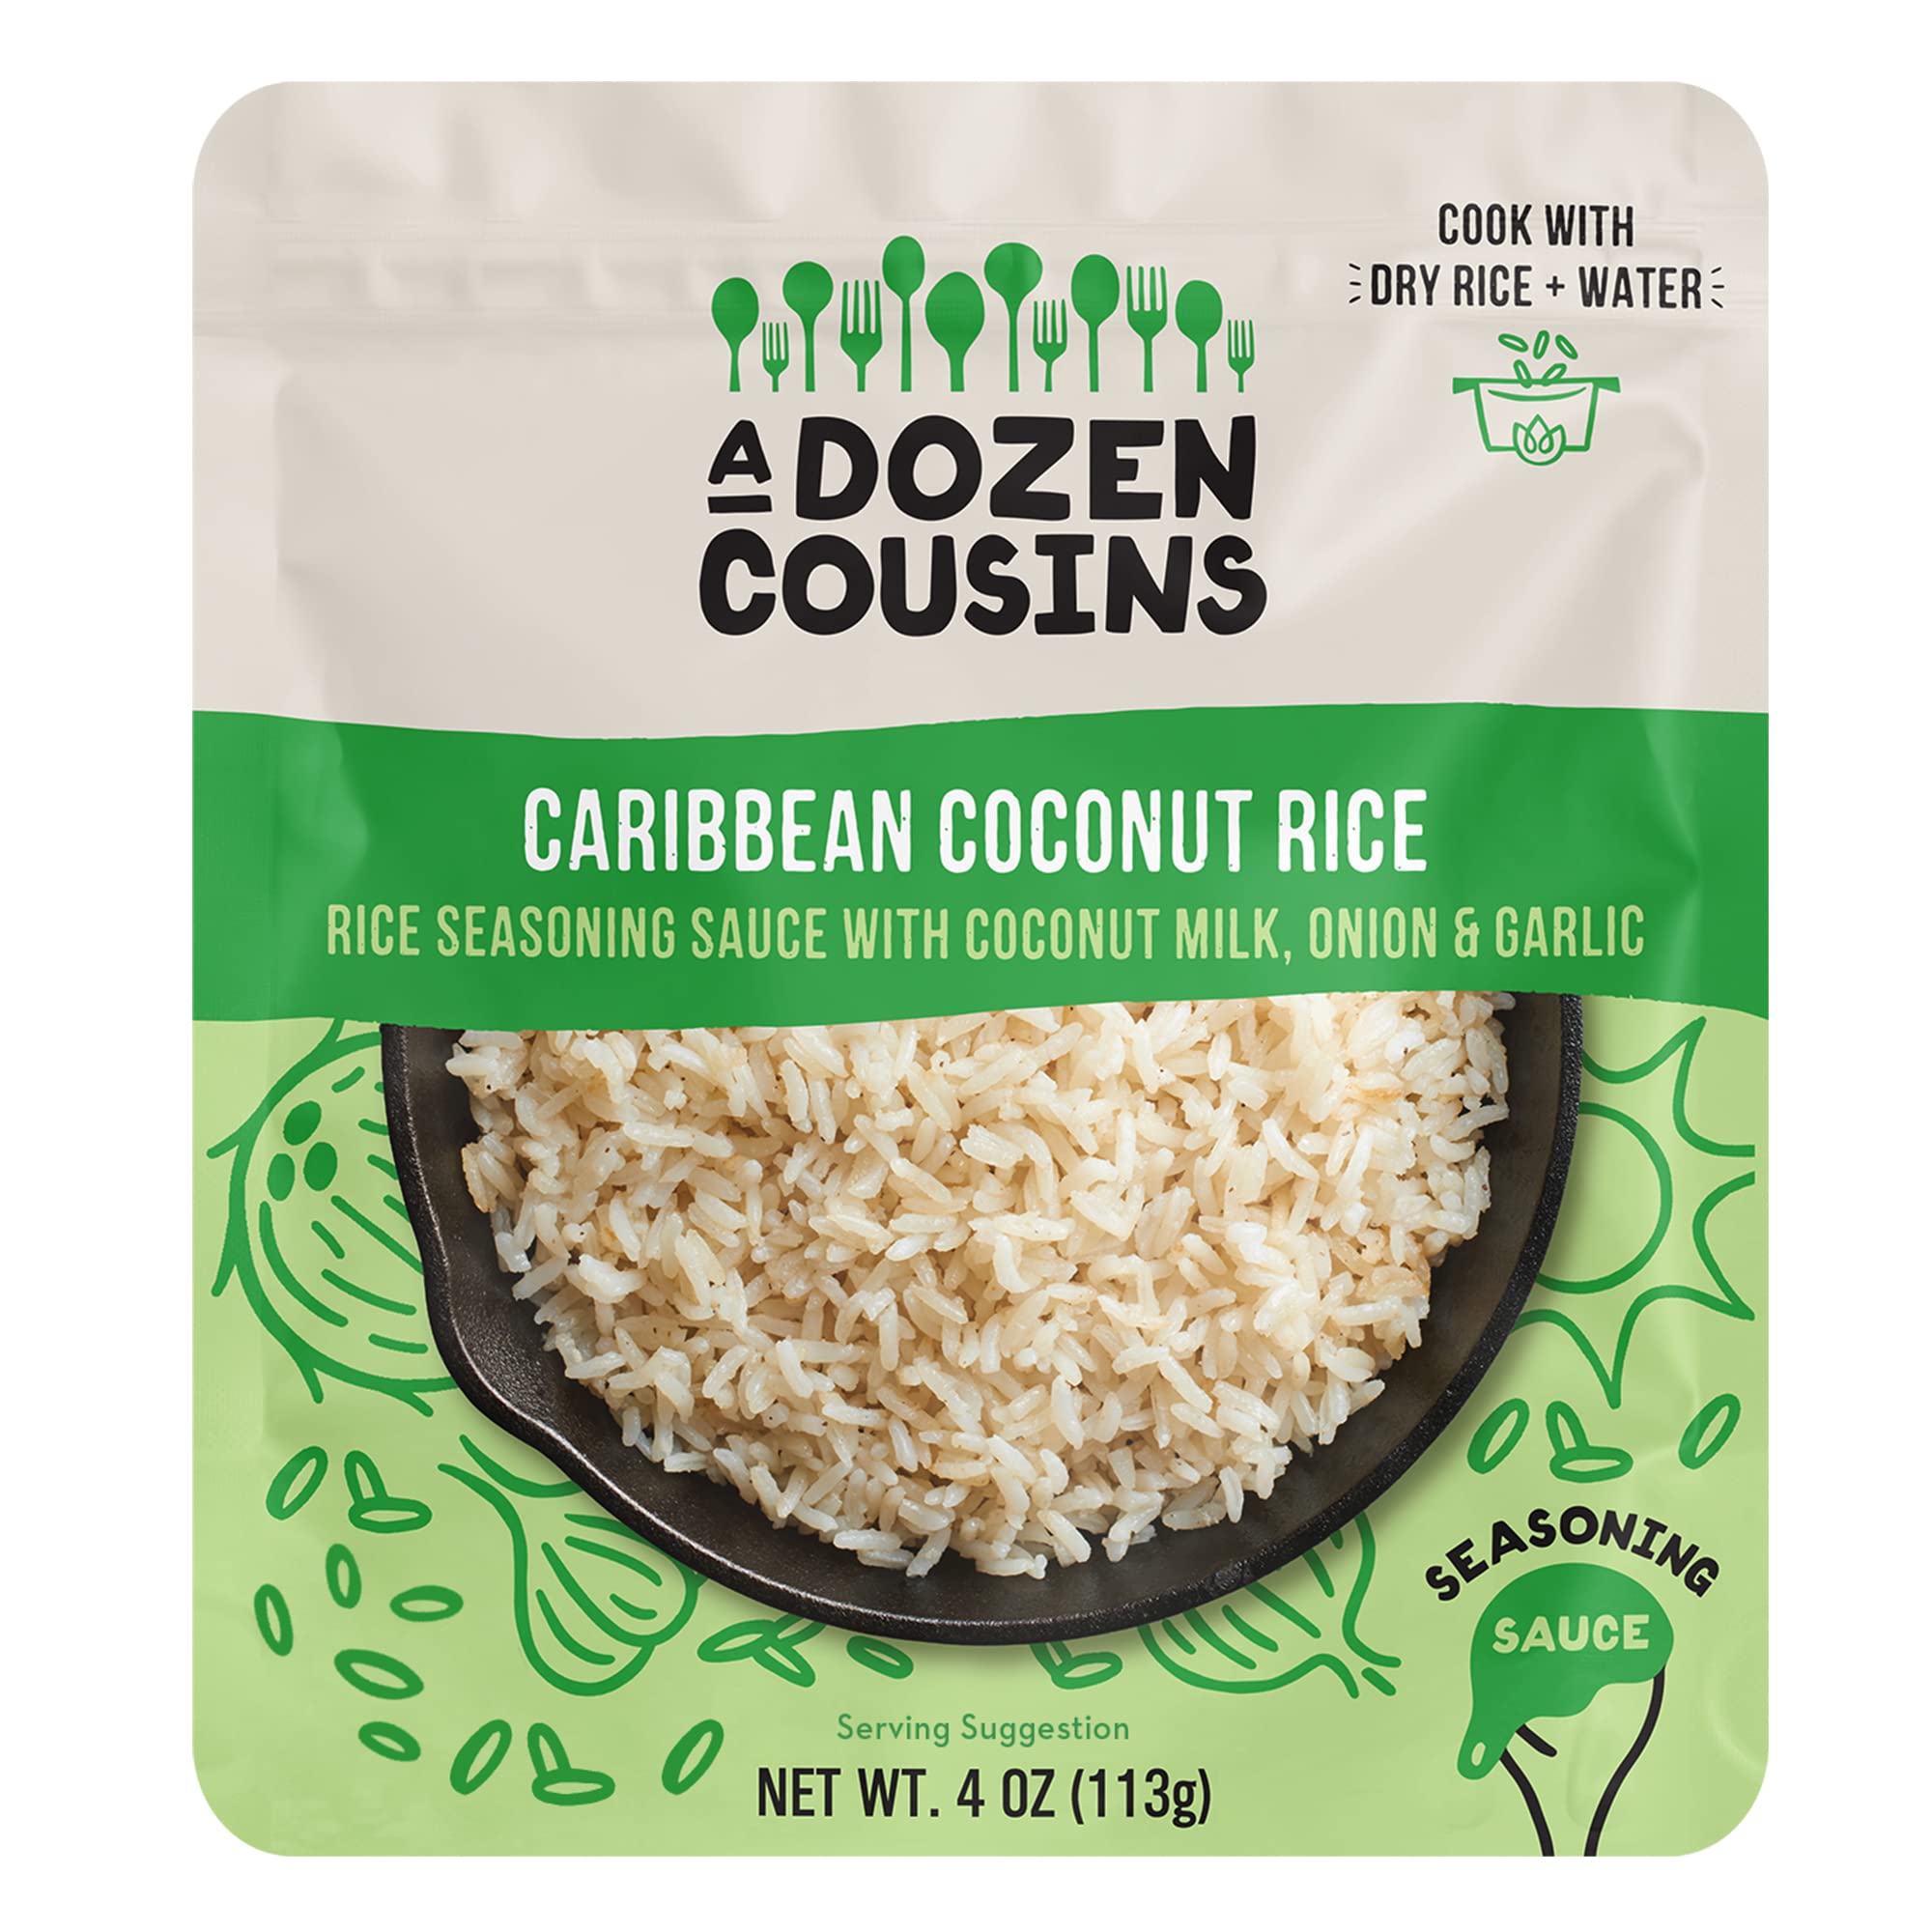 A Dozen Cousins Rice Seasoning Sauce Packets - Season and Prepare Your Own Rice Dishes - 10 Pack - Caribbean Coconut Rice - 4 oz Packet